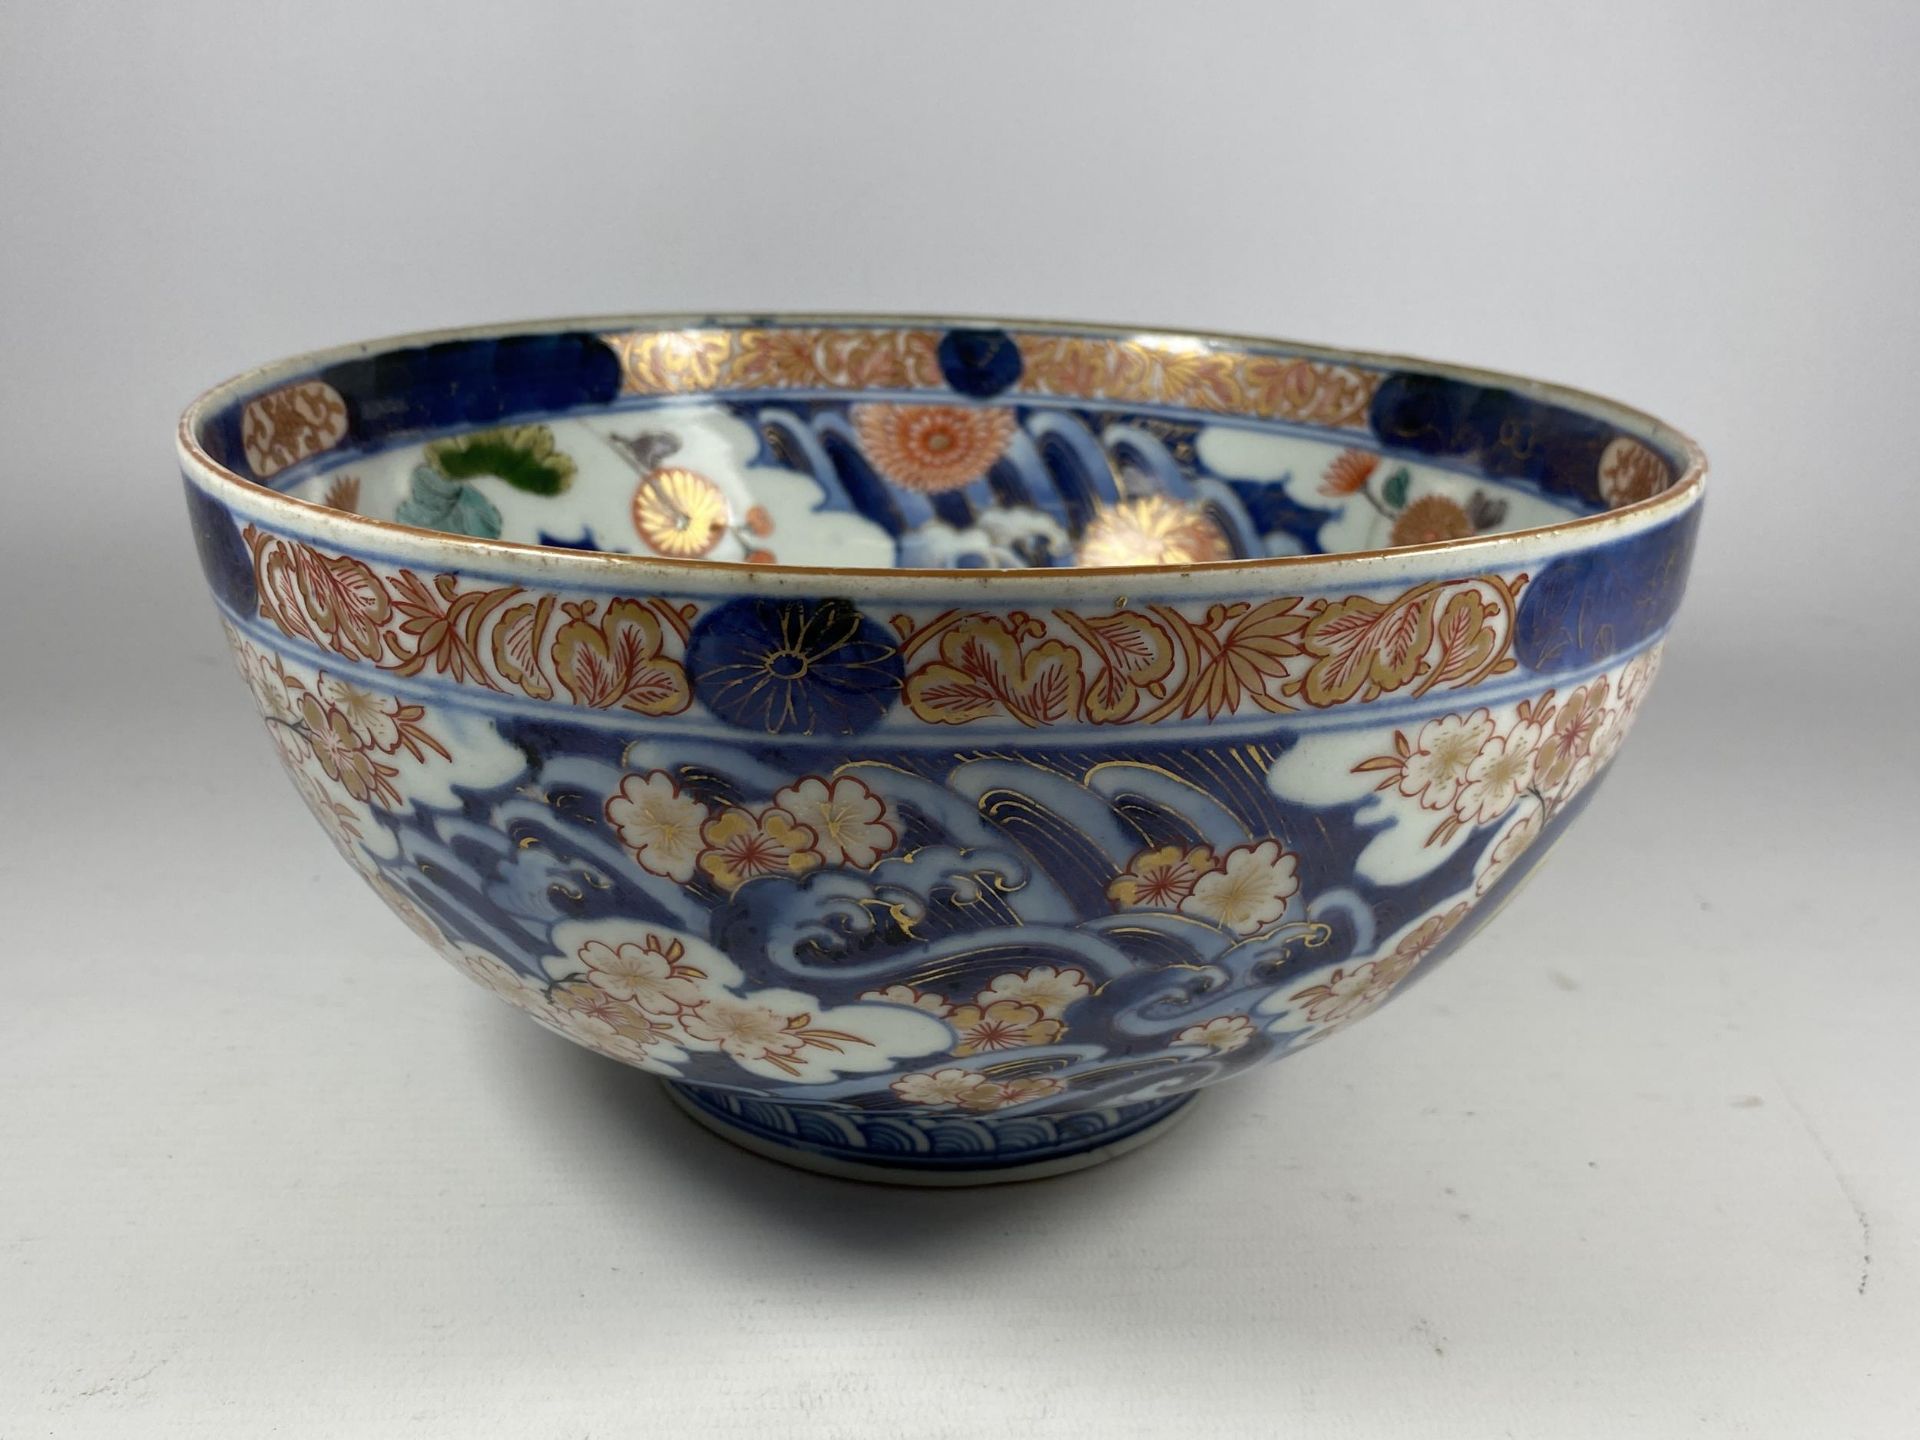 A LARGE JAPANESE MEIJI PERIOD (1868-1912) IMARI PORCELAIN FRUIT BOWL, FLORAL AND DOUBLE RING MARK TO - Image 2 of 9